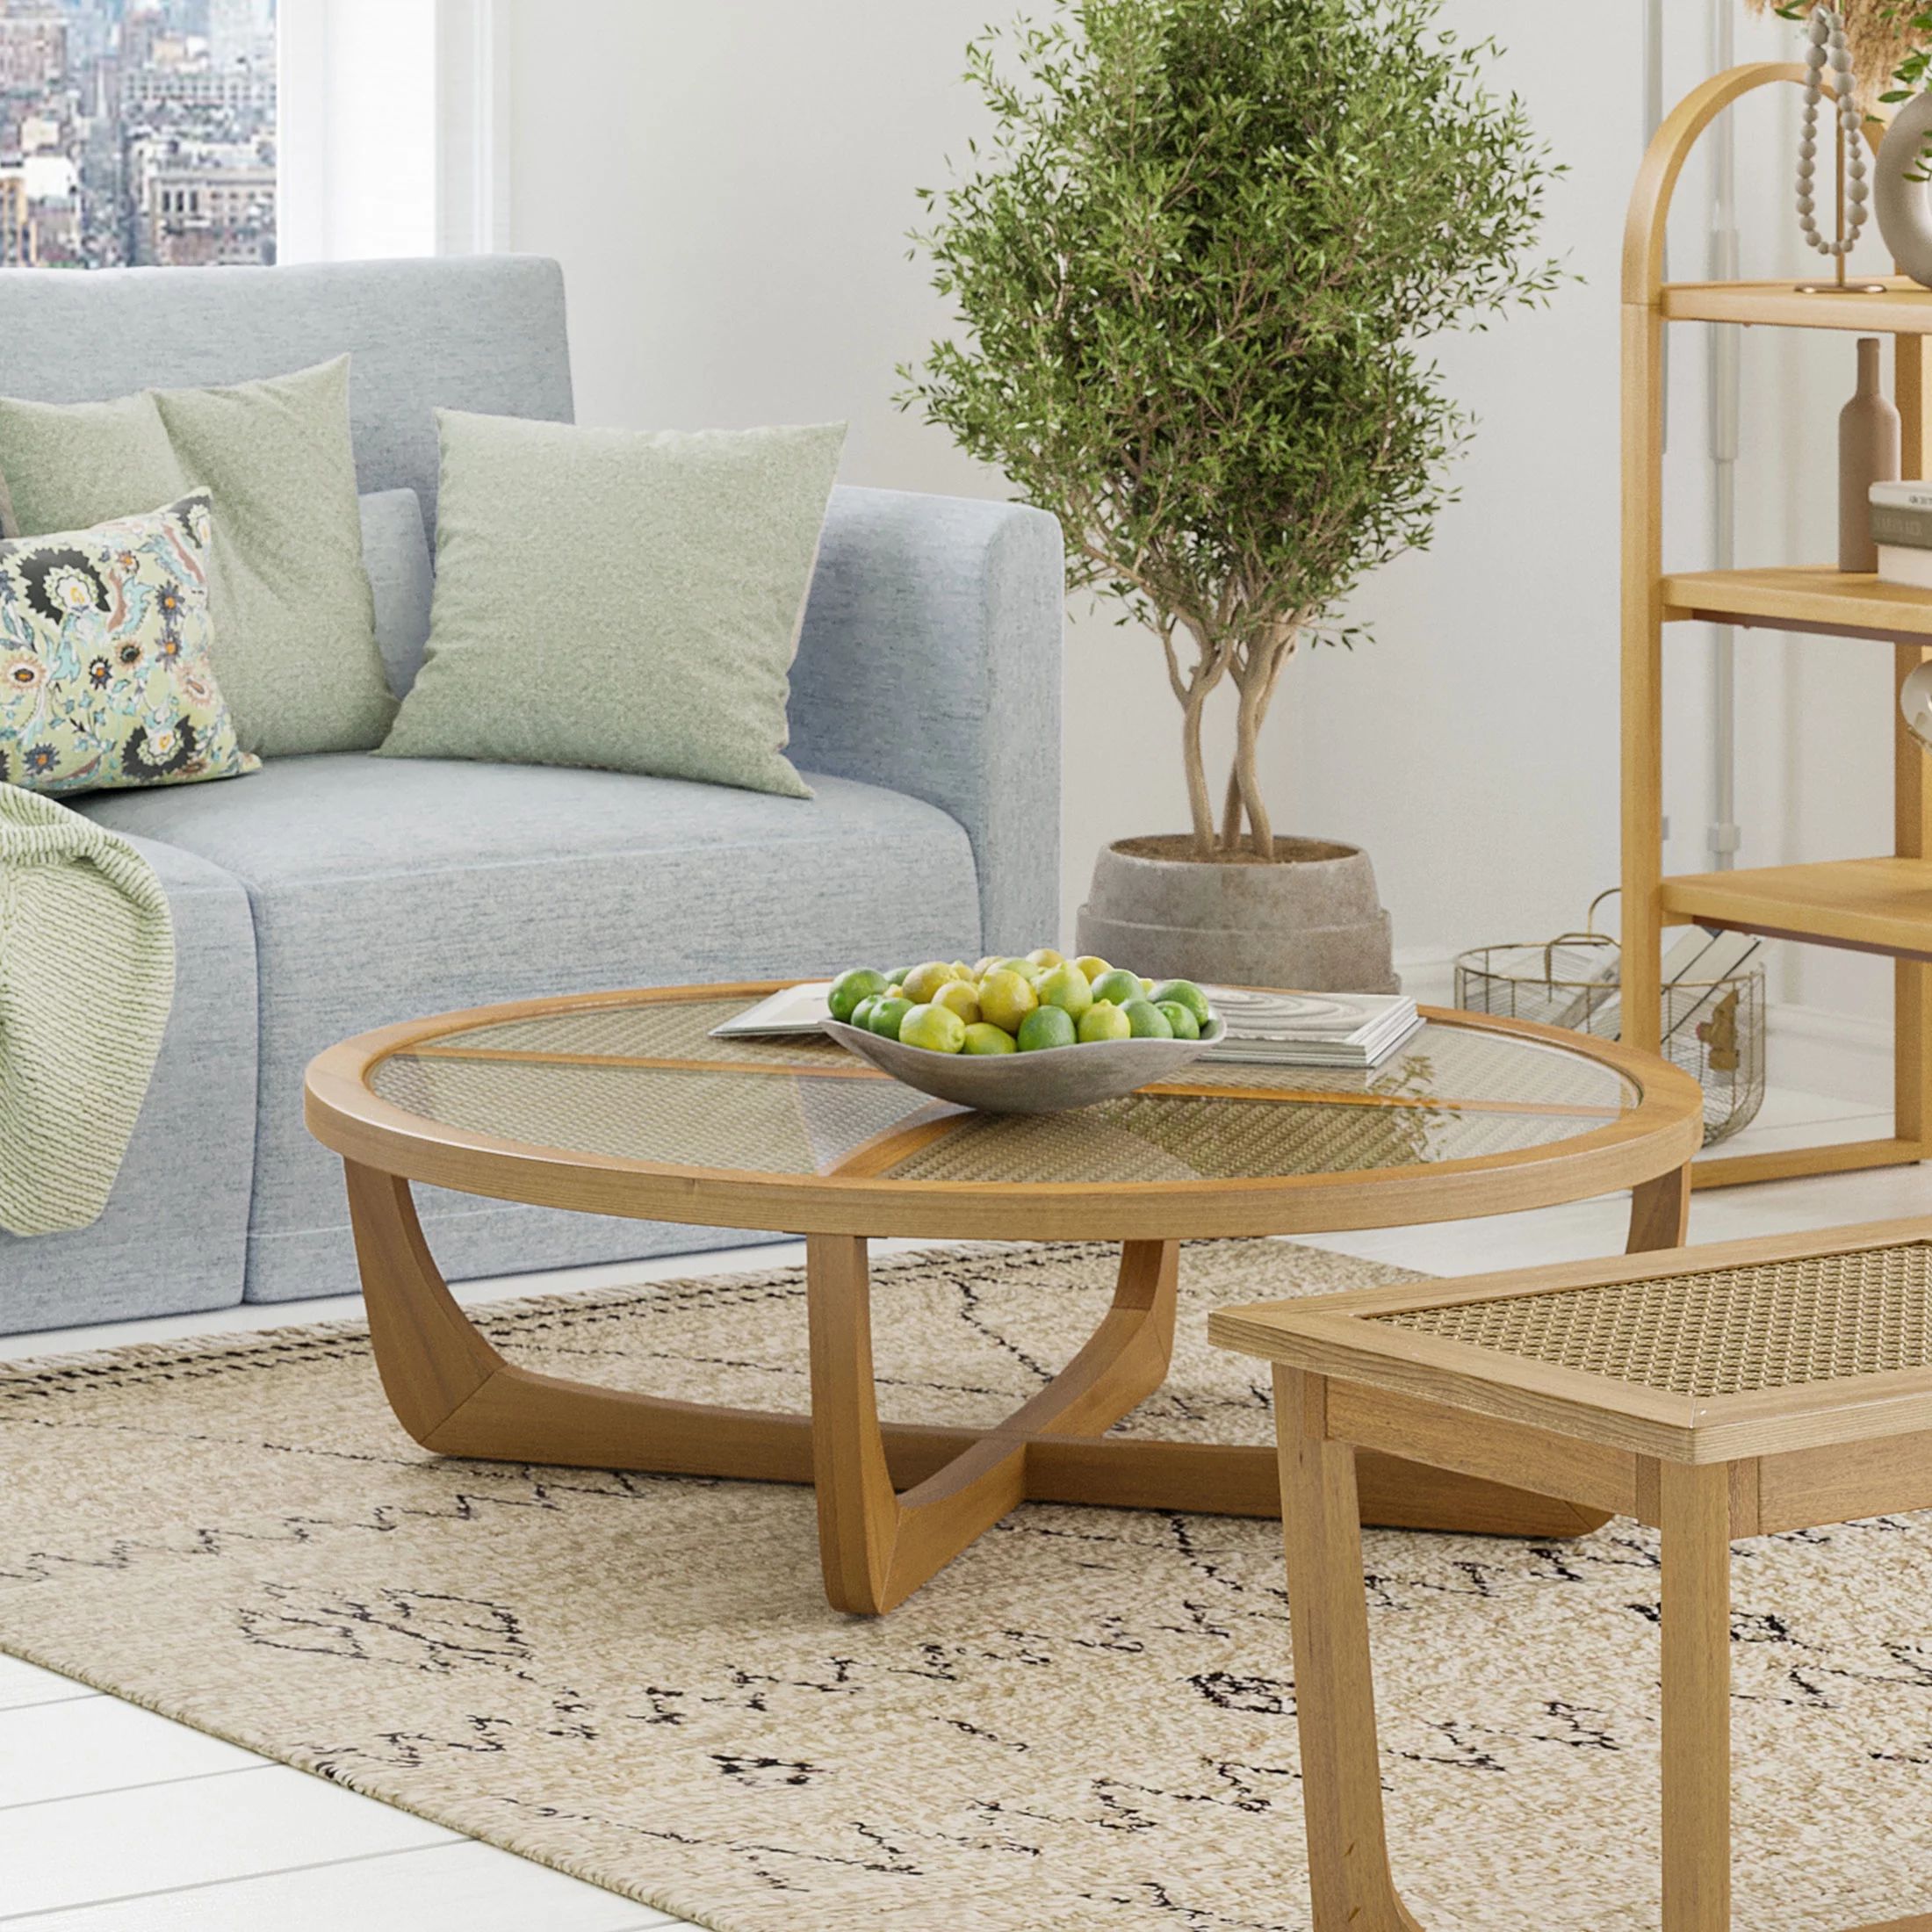 Beautiful Rattan & Glass Coffee Table with Solid Wood Frame by Drew Barrymore - Walmart.com | Walmart (US)